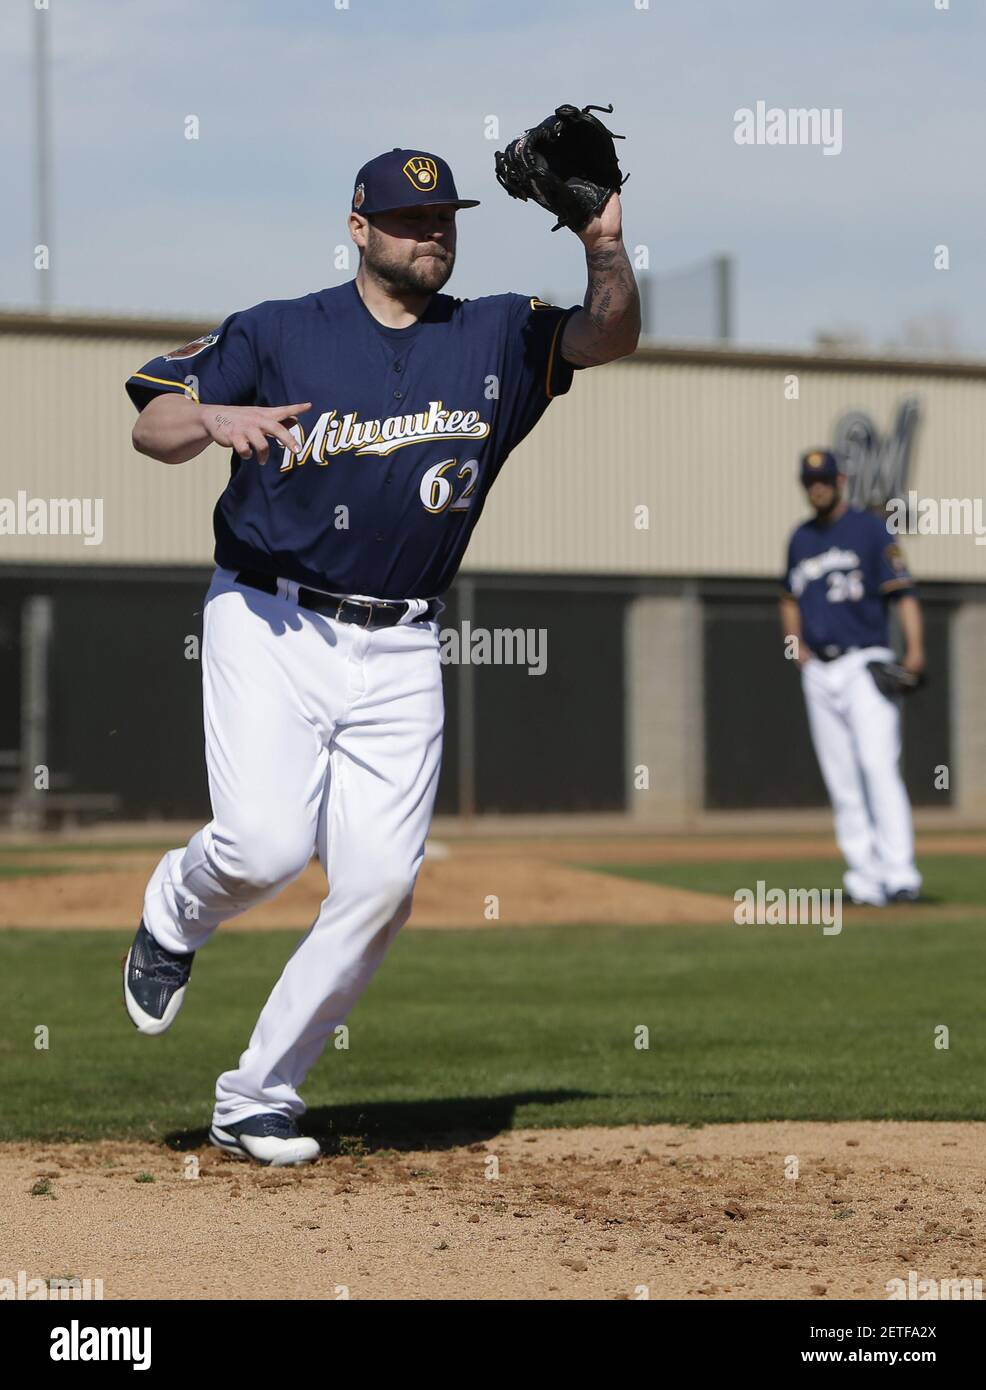 Feb 16, 2017; Maryvale, AZ, USA; Milwaukee Brewers relief pitcher Joba Chamberlain (62) covers first base during spring training camp drills at Maryvale Baseball Park. Mandatory Credit: Rick Scuteri-USA TODAY Sports *** Please Use Credit from Credit Field *** Stock Photo